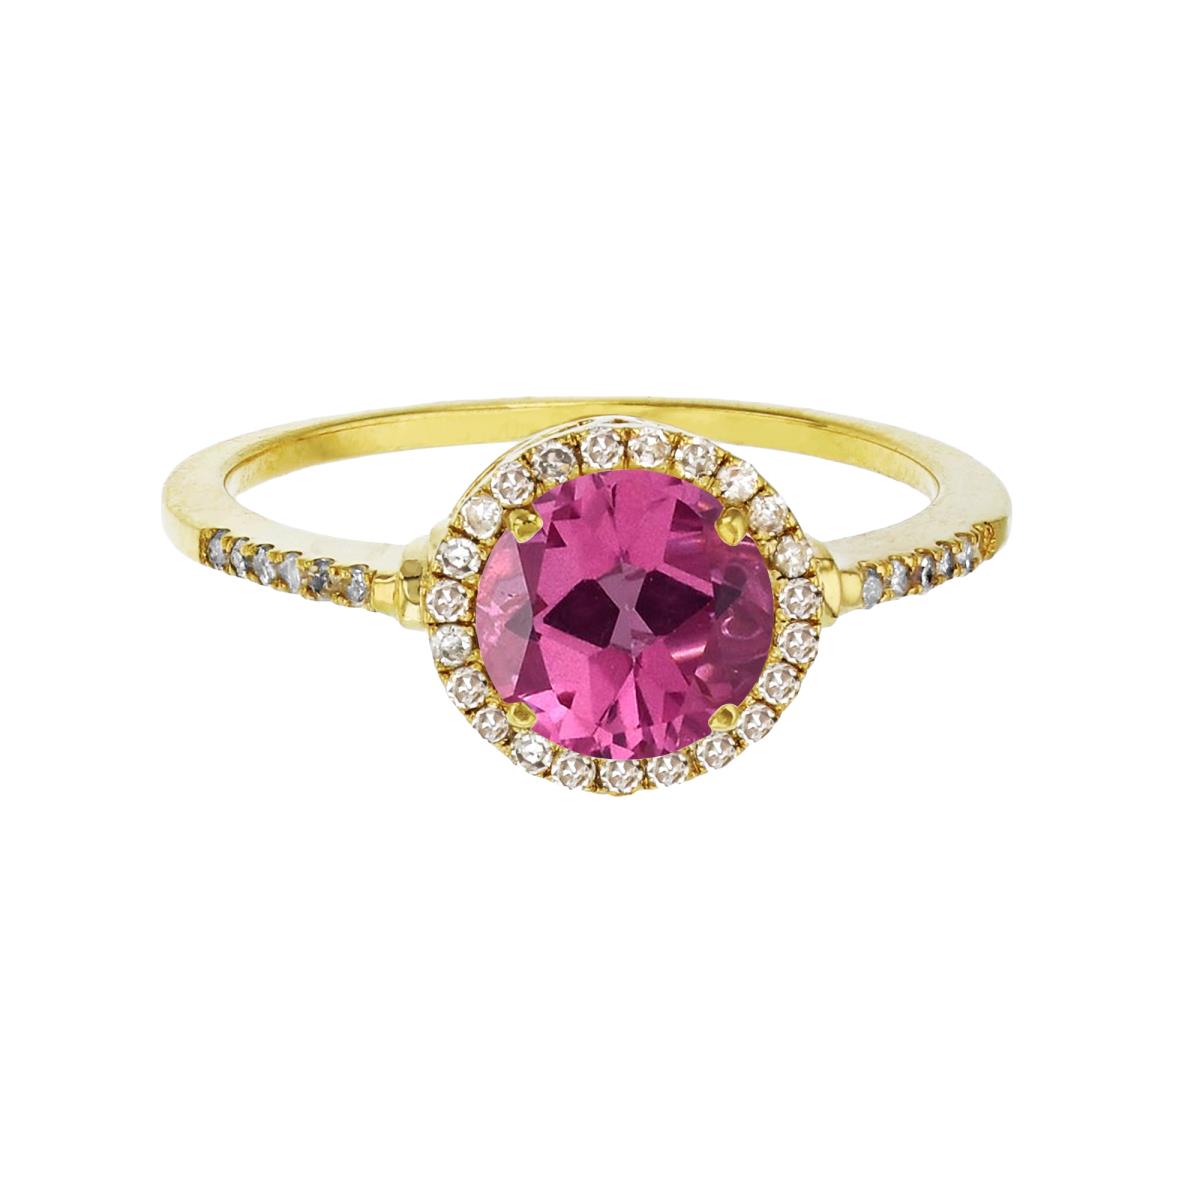 10K Yellow Gold 7mm Round Pure Pink & 0.18 CTTW Diamond Halo Ring